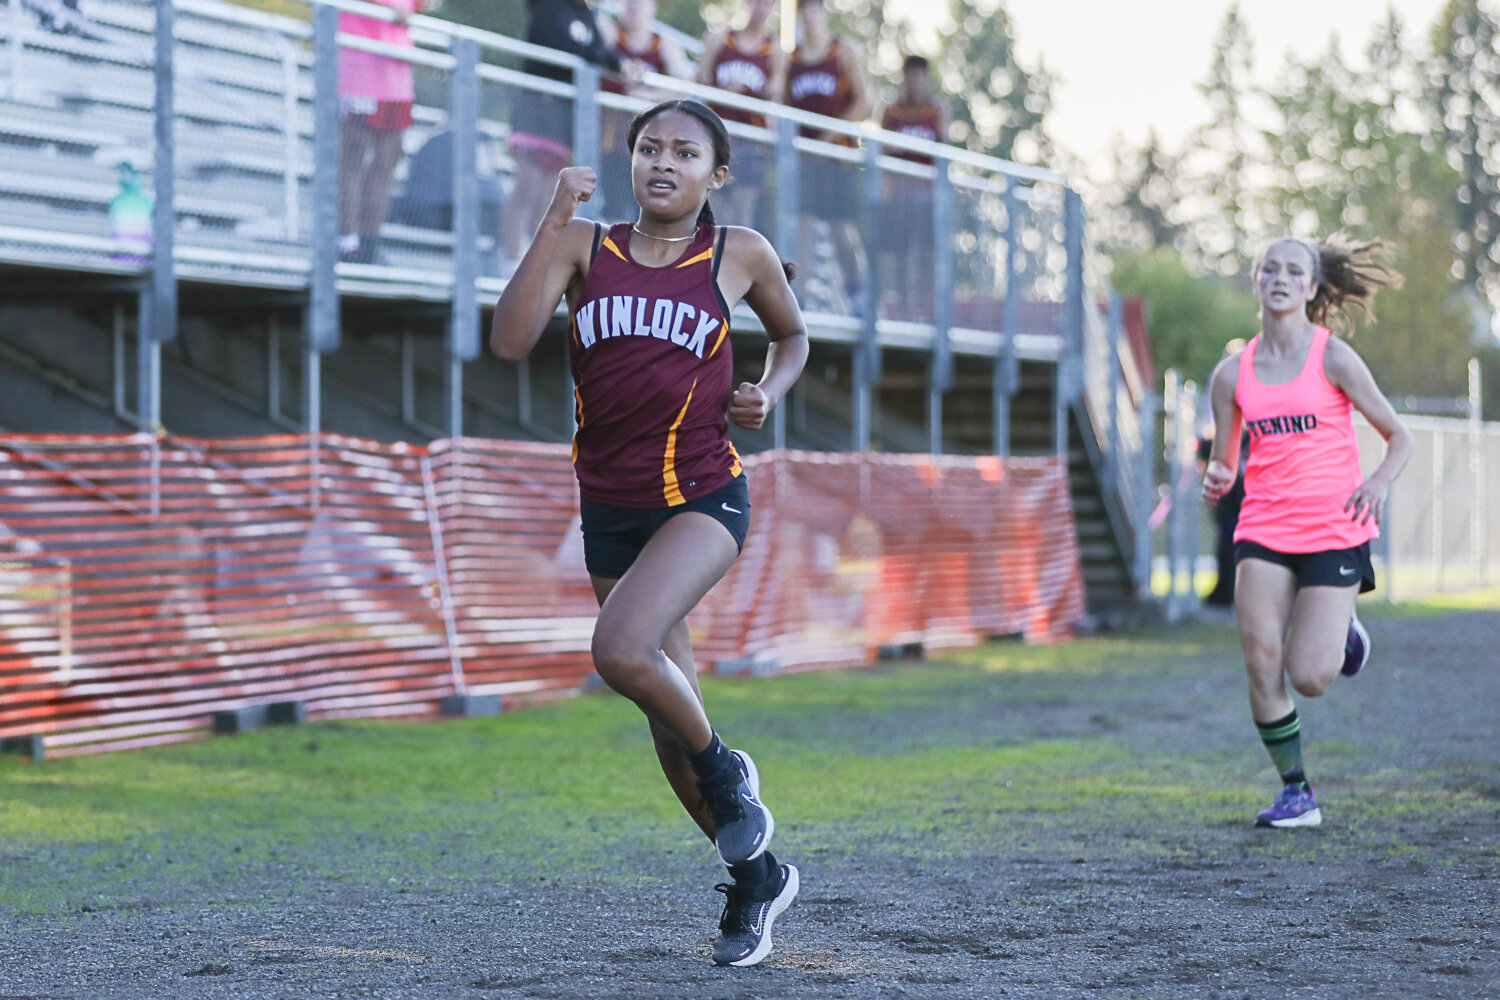 Winlock's Victoria Sancho beats Tenino's Samantha Smith in a sprint for second place at a cross country meet at Winlock on Oct. 12.